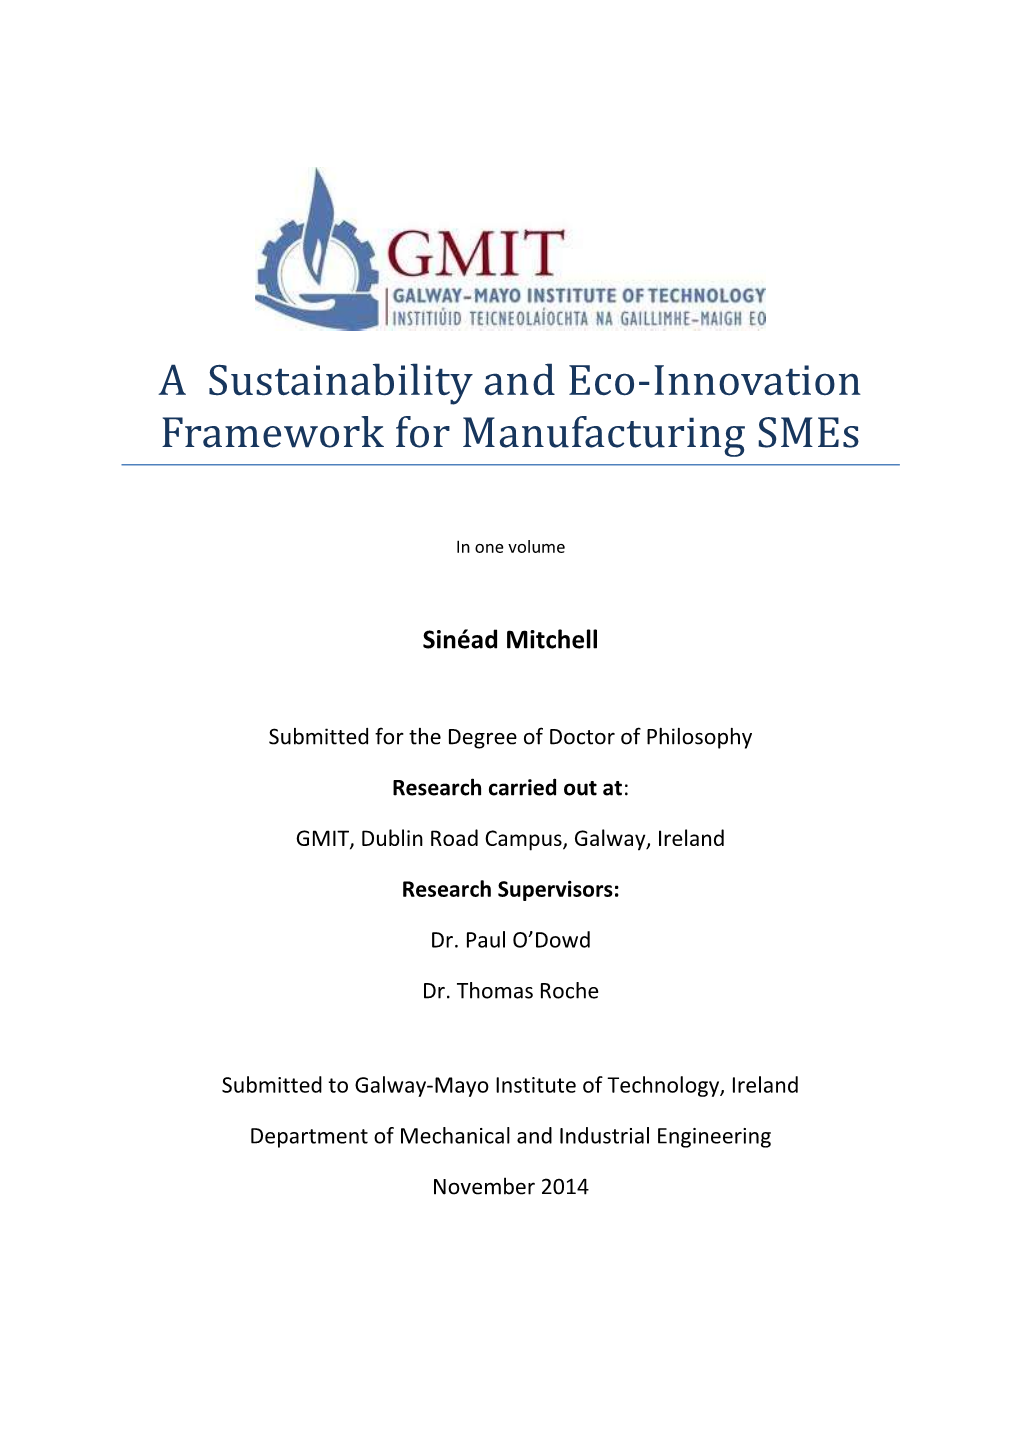 A Sustainability and Eco-Innovation Framework for Manufacturing Smes